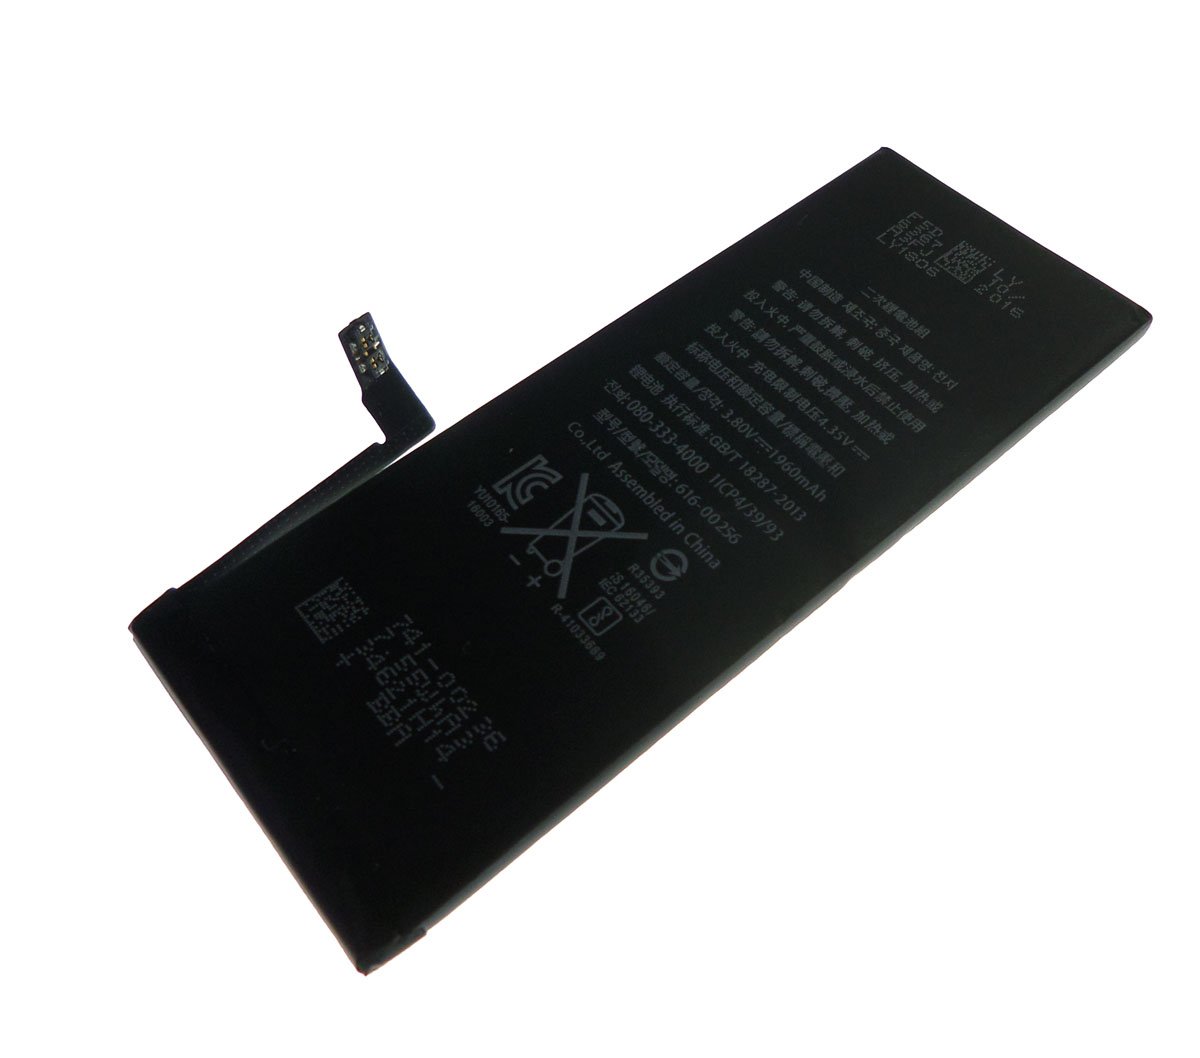 Battery for Apple iPhone 7